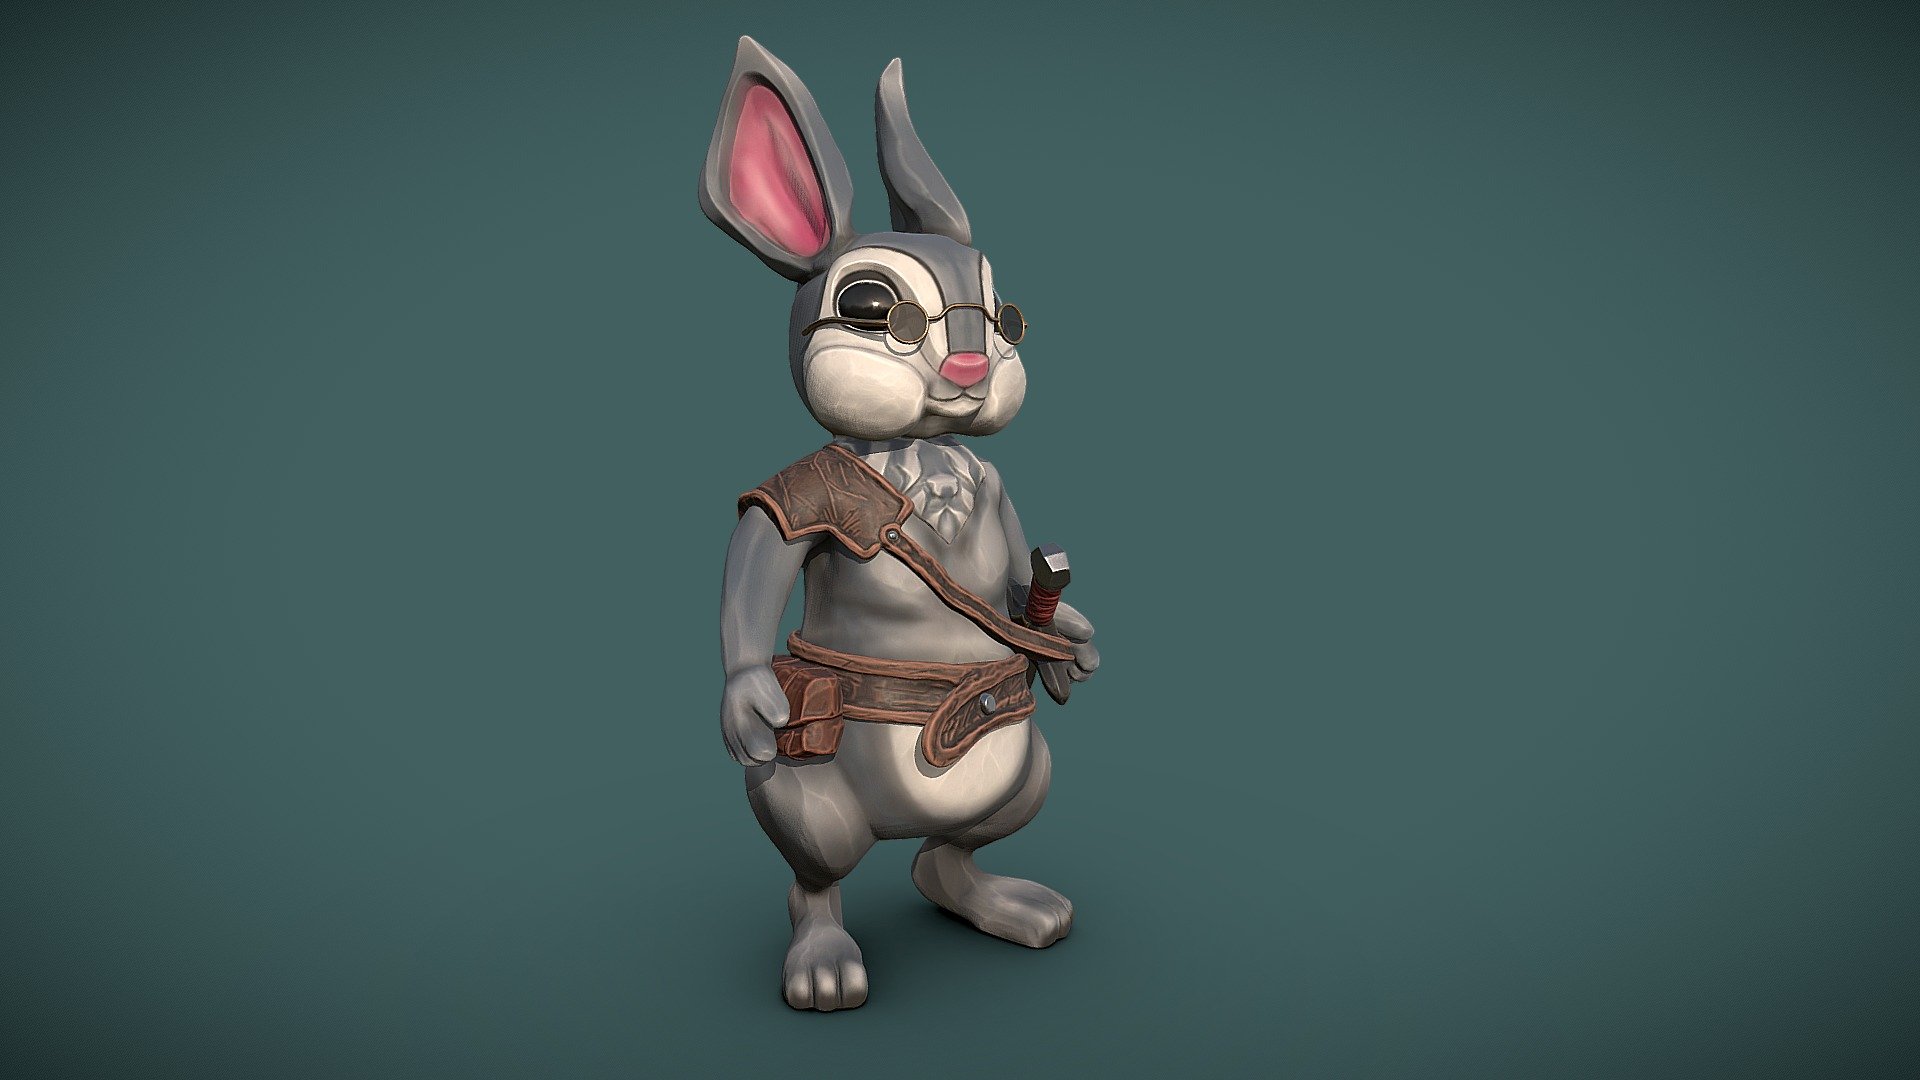 Just trying some new things for fun with zbrush/maya/substance pipeline.
Some marmoset renders on artstation - Rabbit Traveler - Download Free 3D model by SamTheCaribbean 3d model